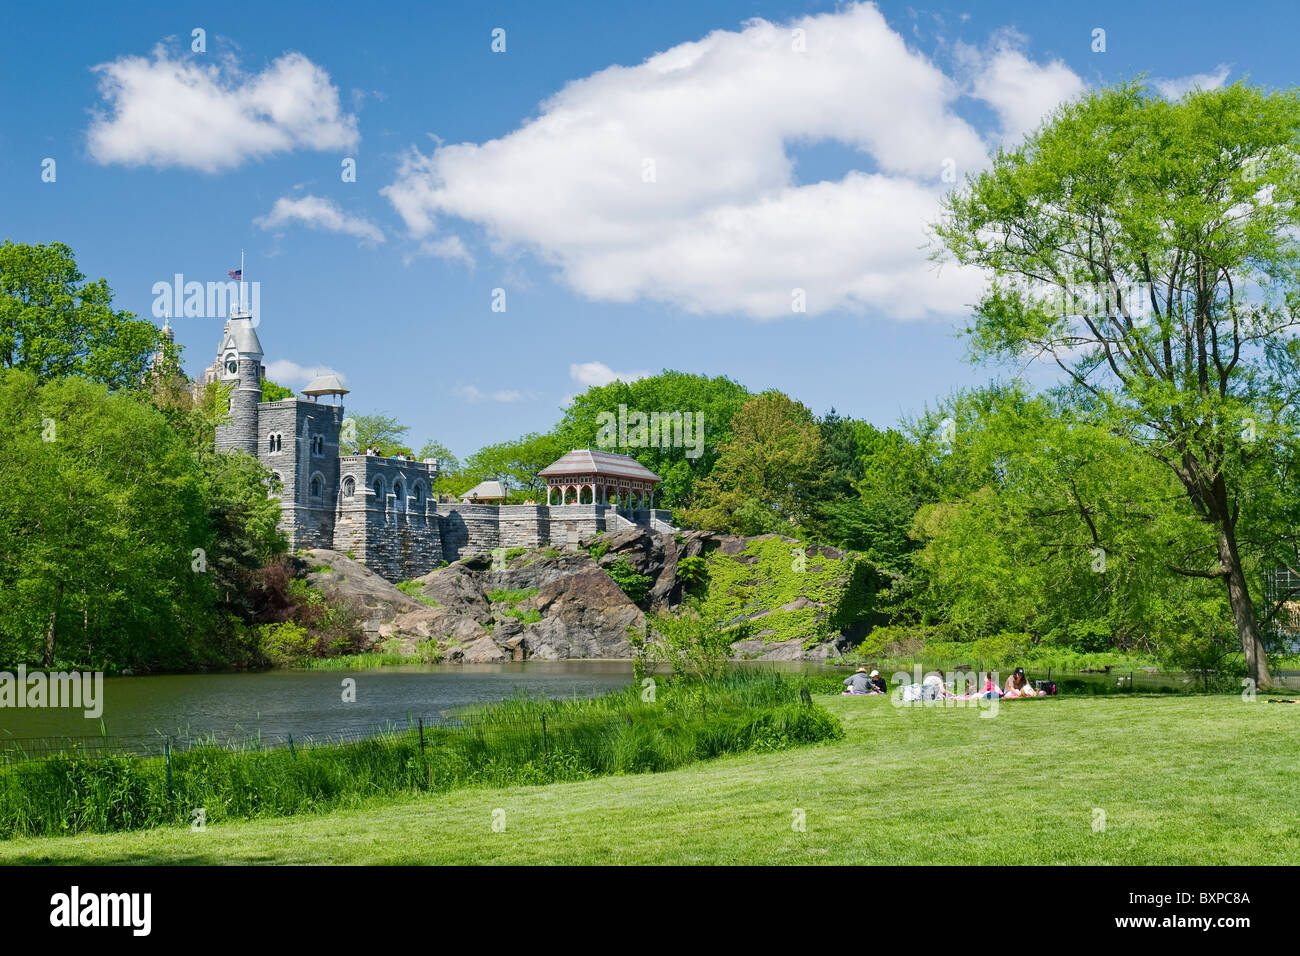 Belvedere Castle and Turtle Pond, Central Park, New York City. Stock Photo